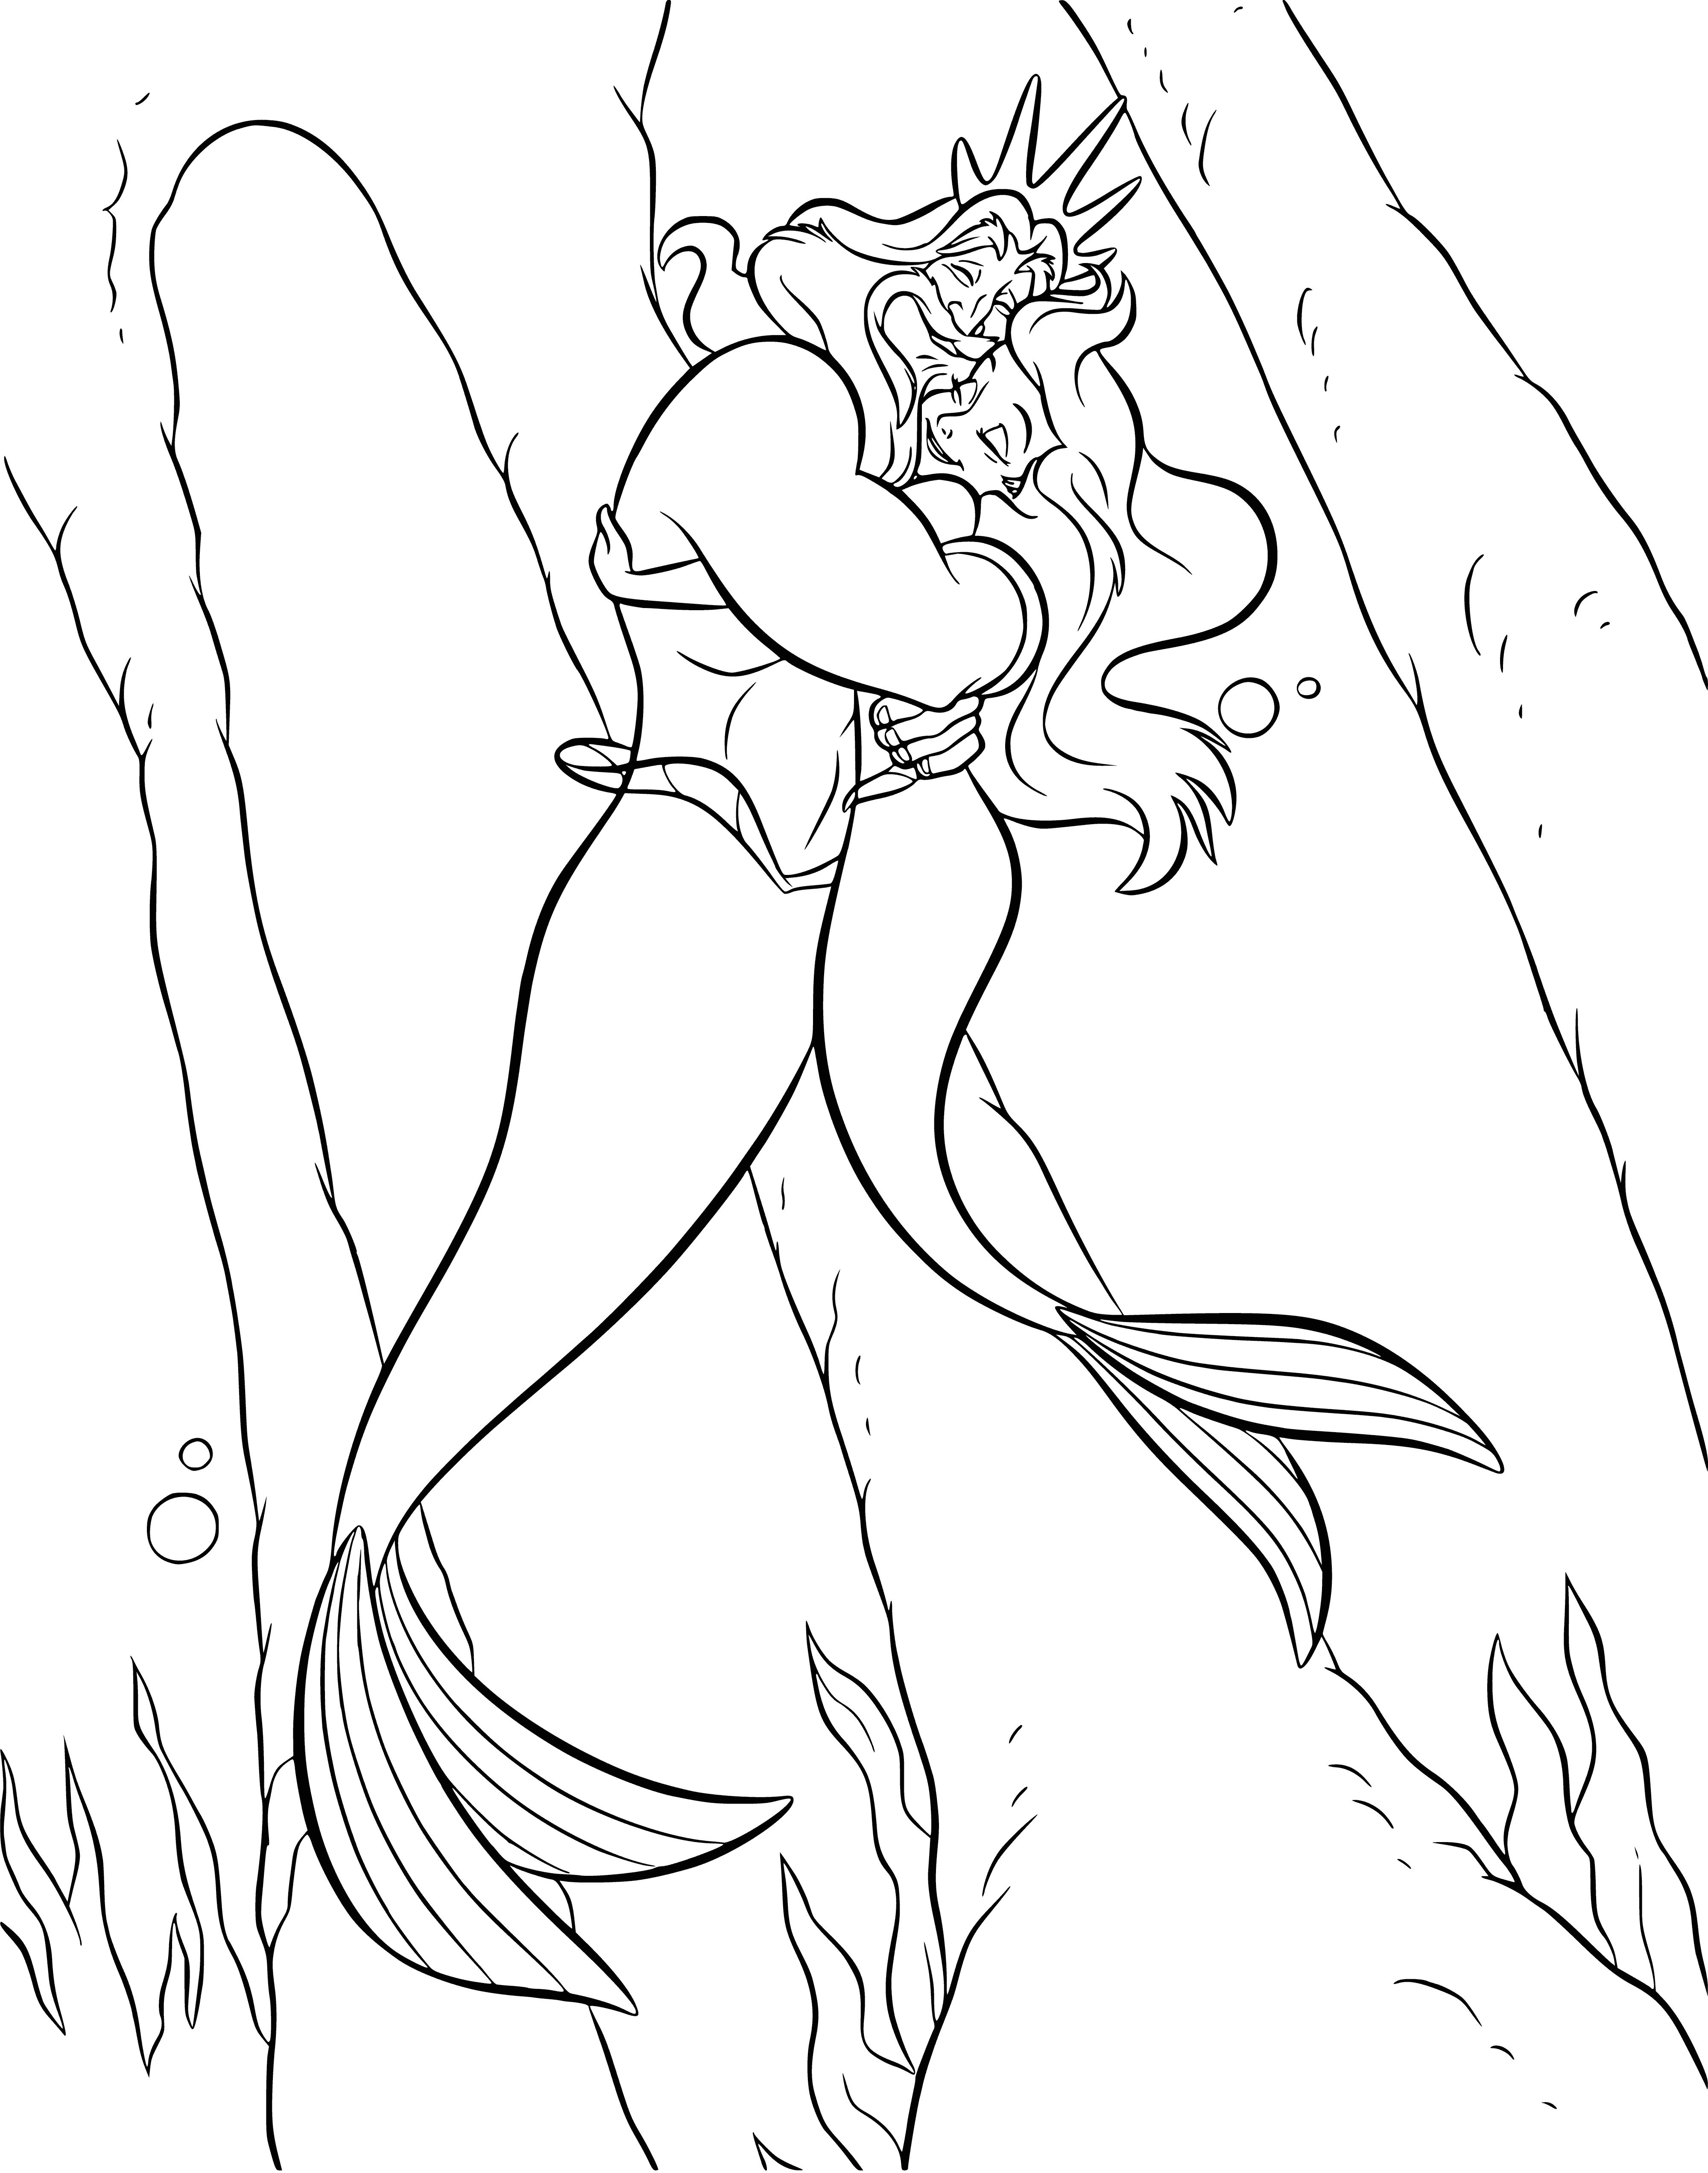 The Little Mermaid Ariel and King Triton coloring page